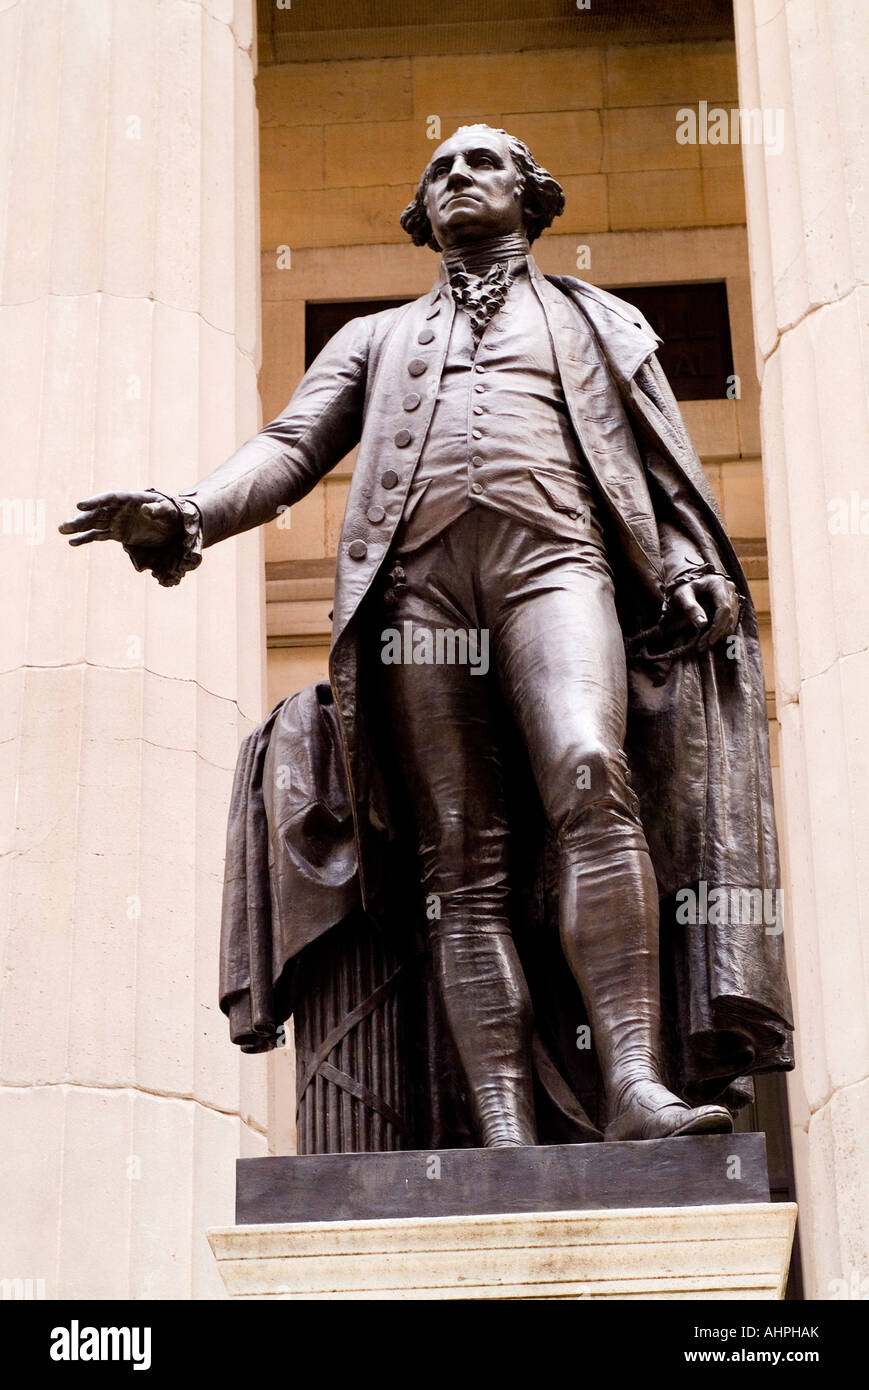 Abraham Lincoln Statue on Wall Street, New York Stock Photo - Alamy